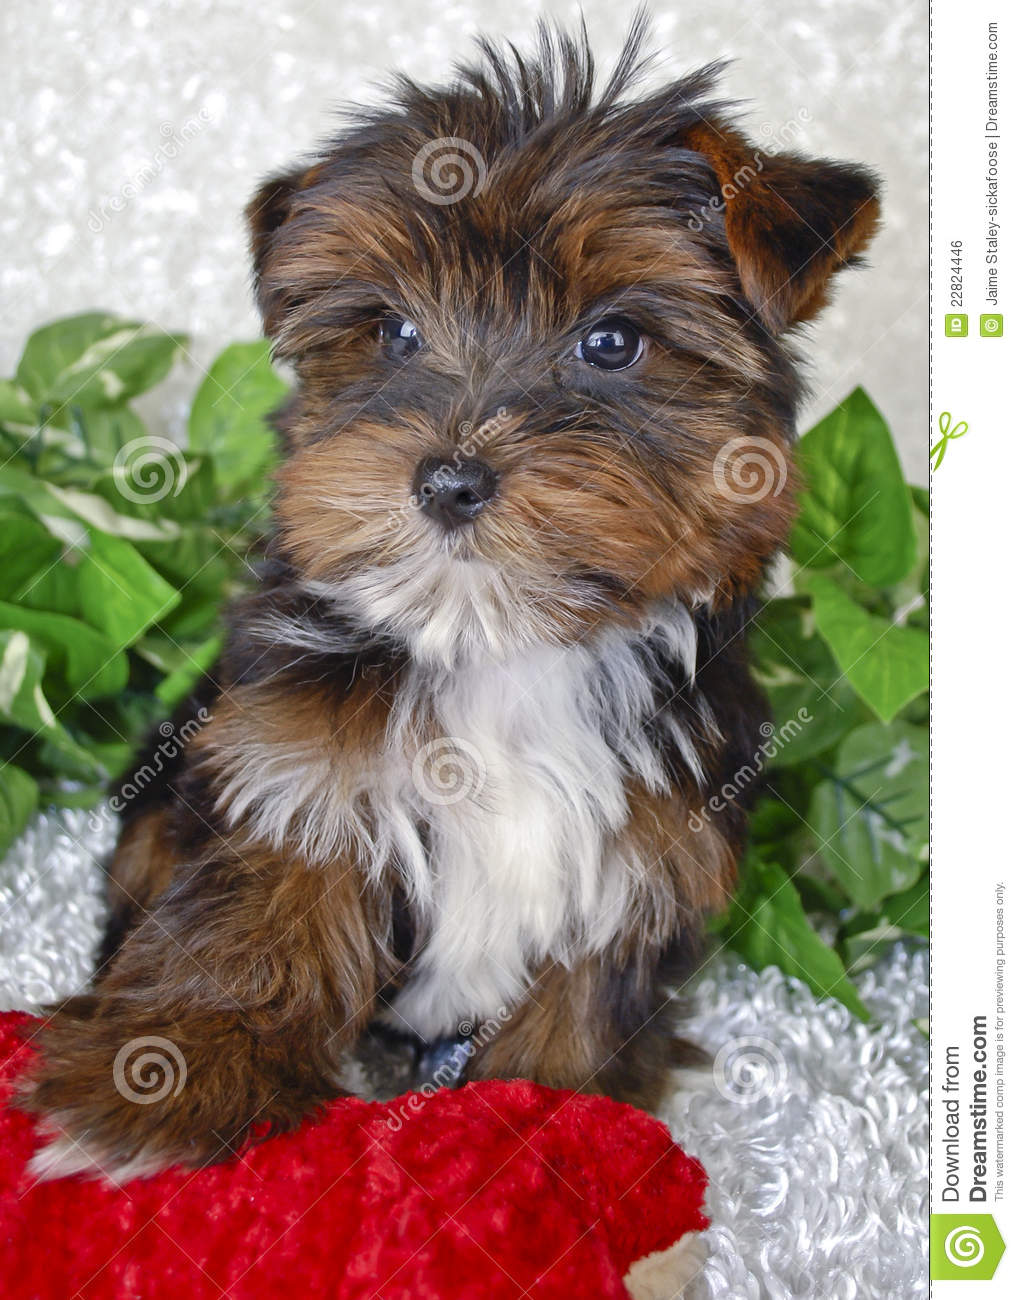 Sweet Little Yorkie Puppy With A Red Dog Toy On A White Background 